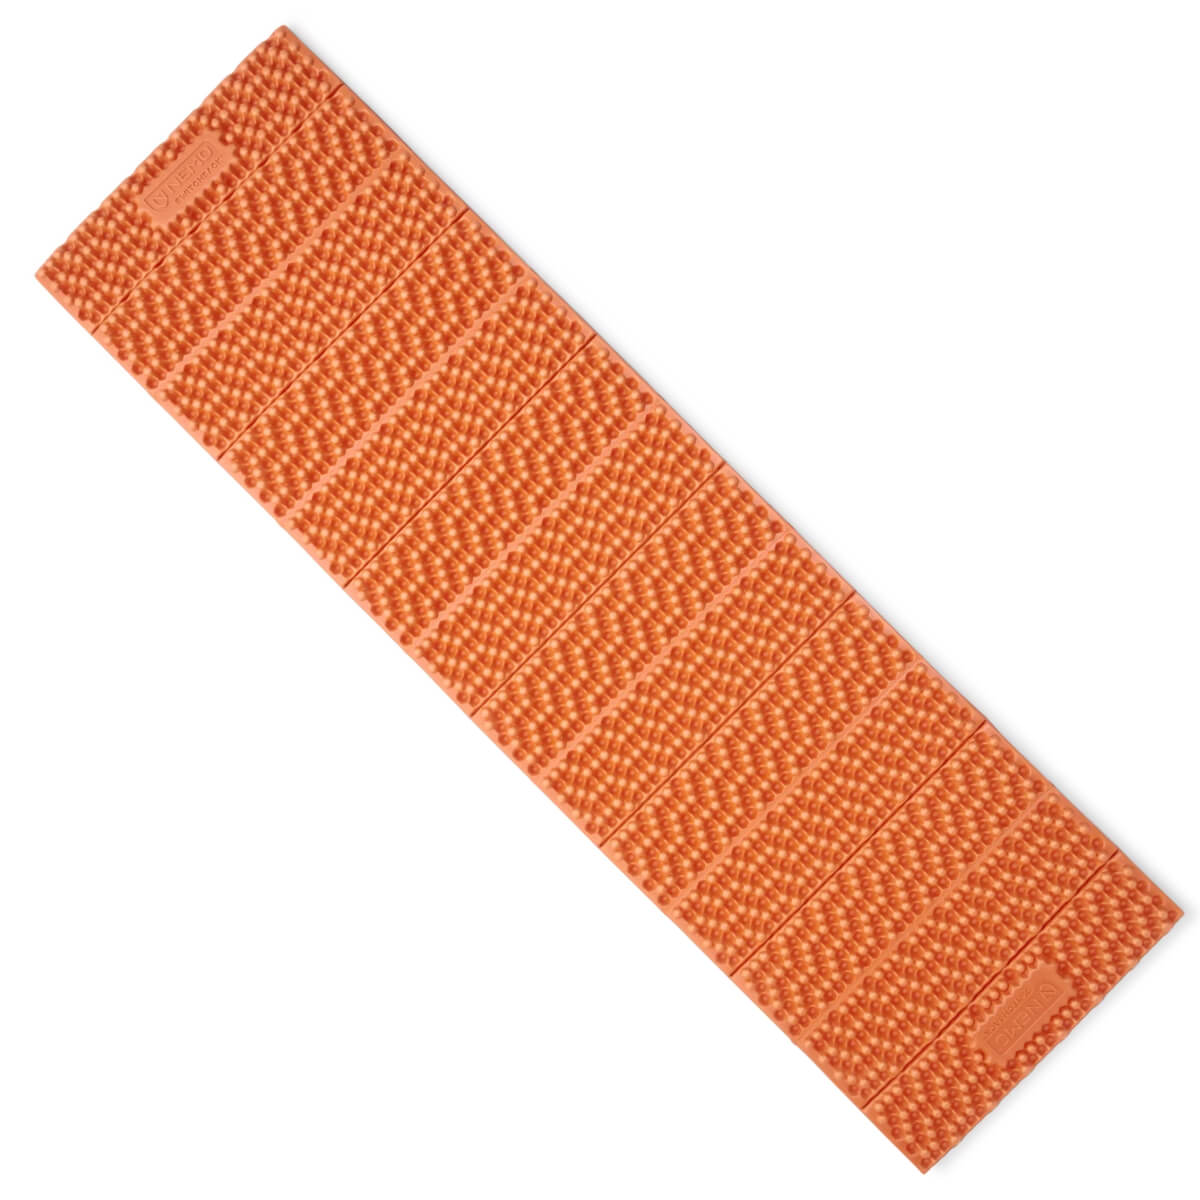 Nemo Switchback closed cell foam